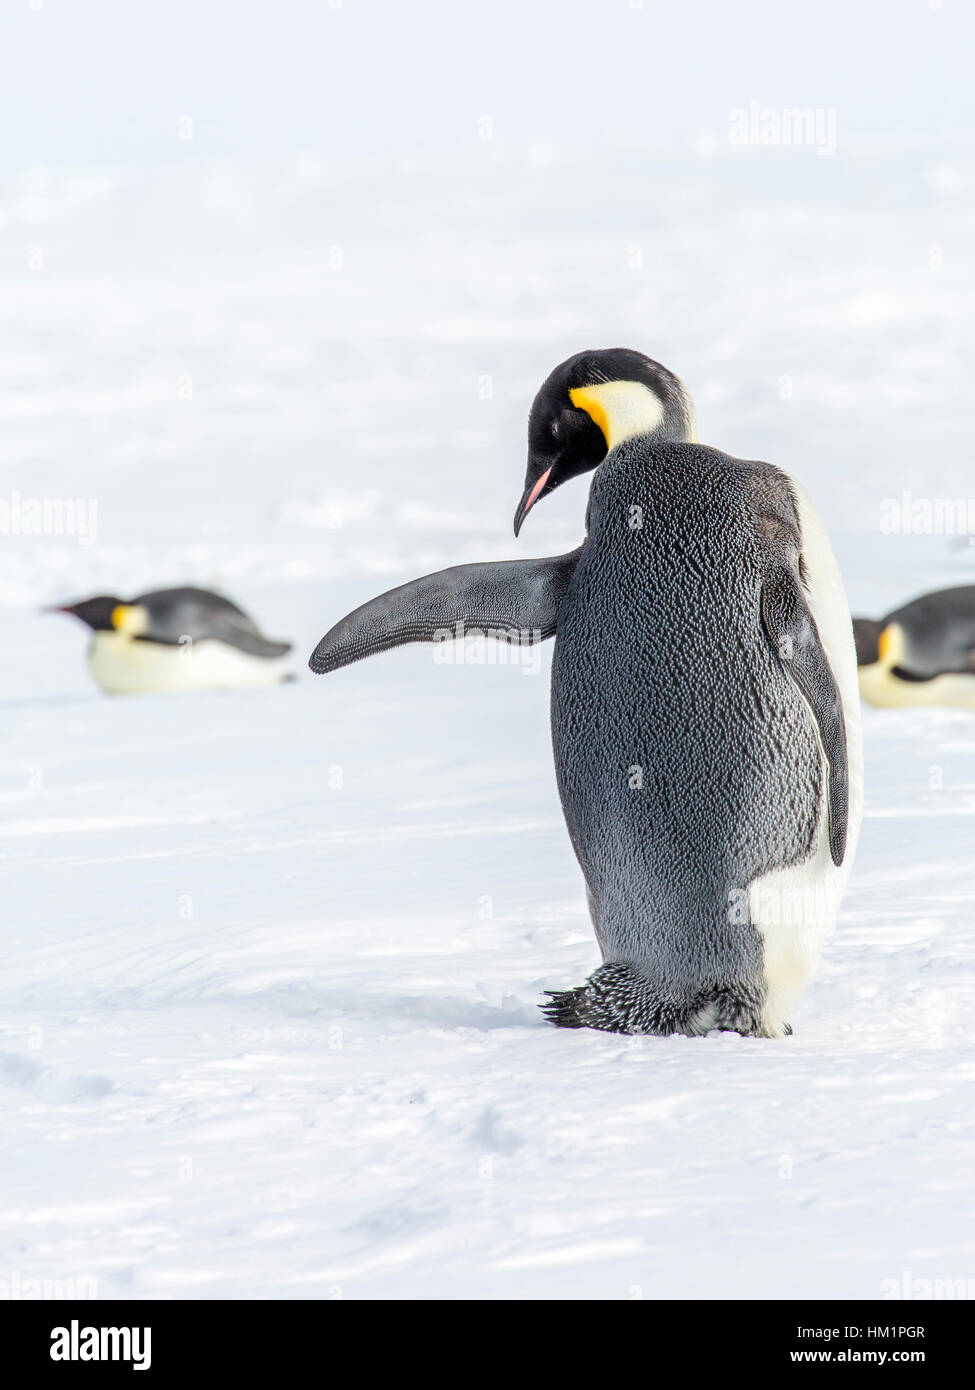 Gould Bay, Weddell Sea, Antarctica. 18th Nov, 2016. The image is of an Emperor Penguin caught mid-flight exercising neck and wing muscles. However it is beside the route of Emperor Penguins travelling the ten miles to open sea for feeding purposes. So the scene is reminiscent of a traffic cop directing the sledging Emperors seen in the background. *PLEASE NOTE LIVE NEWS RATES APPLY* Credit: Roger Clark/Alamy Live News Stock Photo